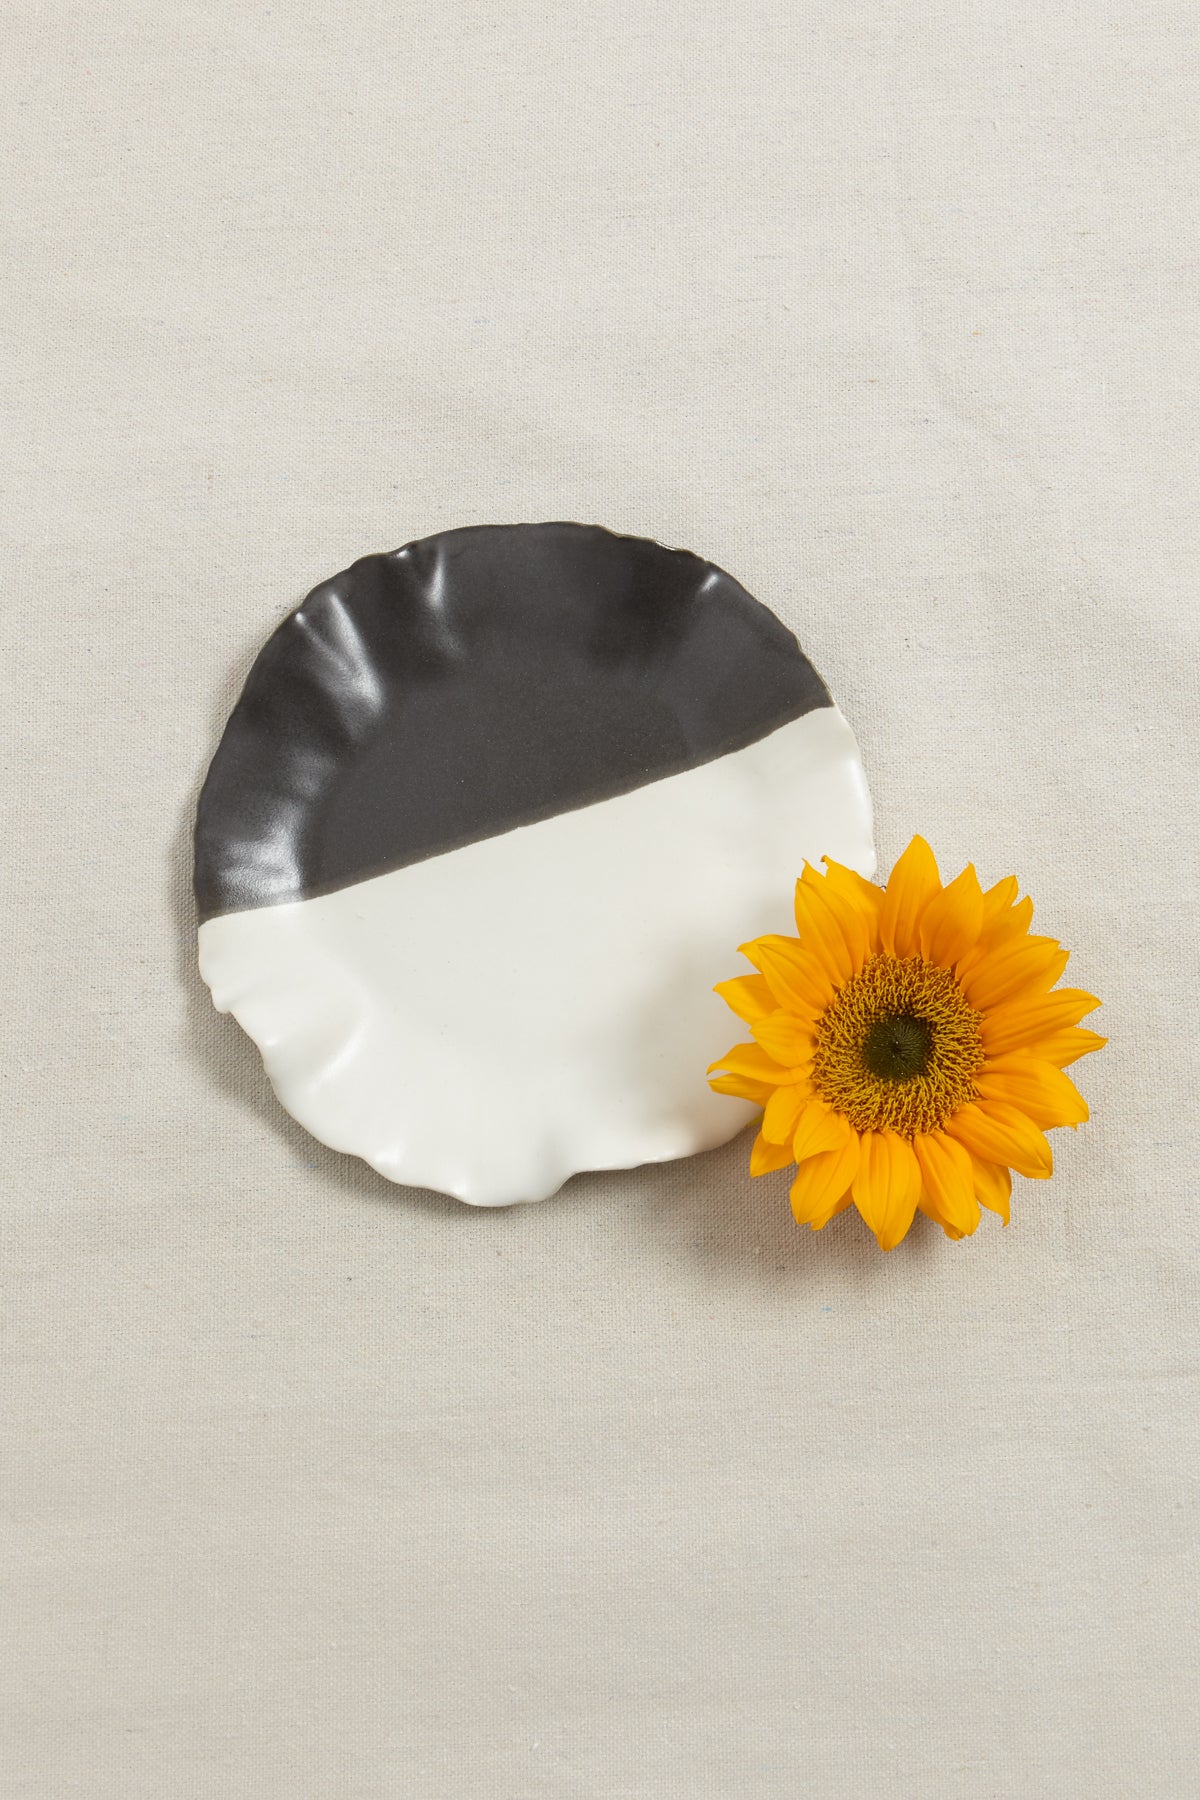 Handcrafted Black and White Plate